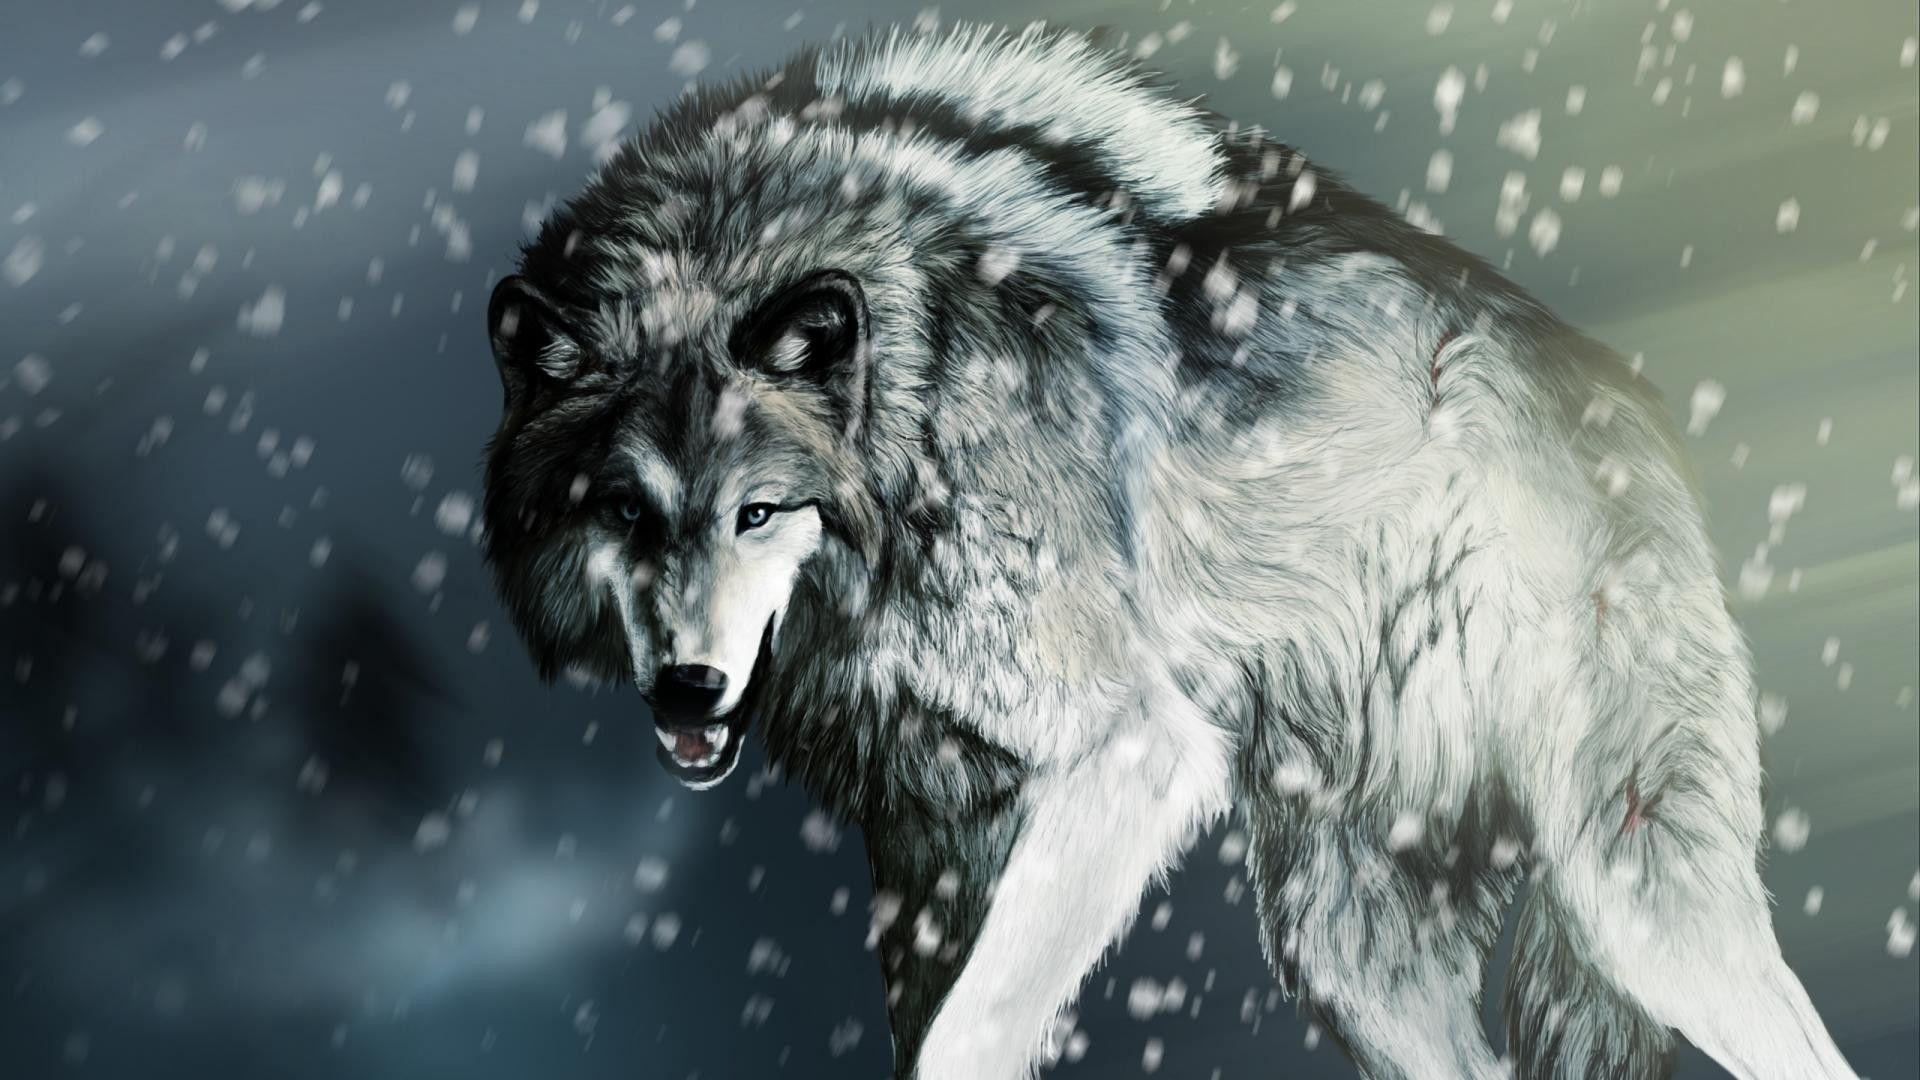 Cool Wolf Wallpapers - Top Free Cool